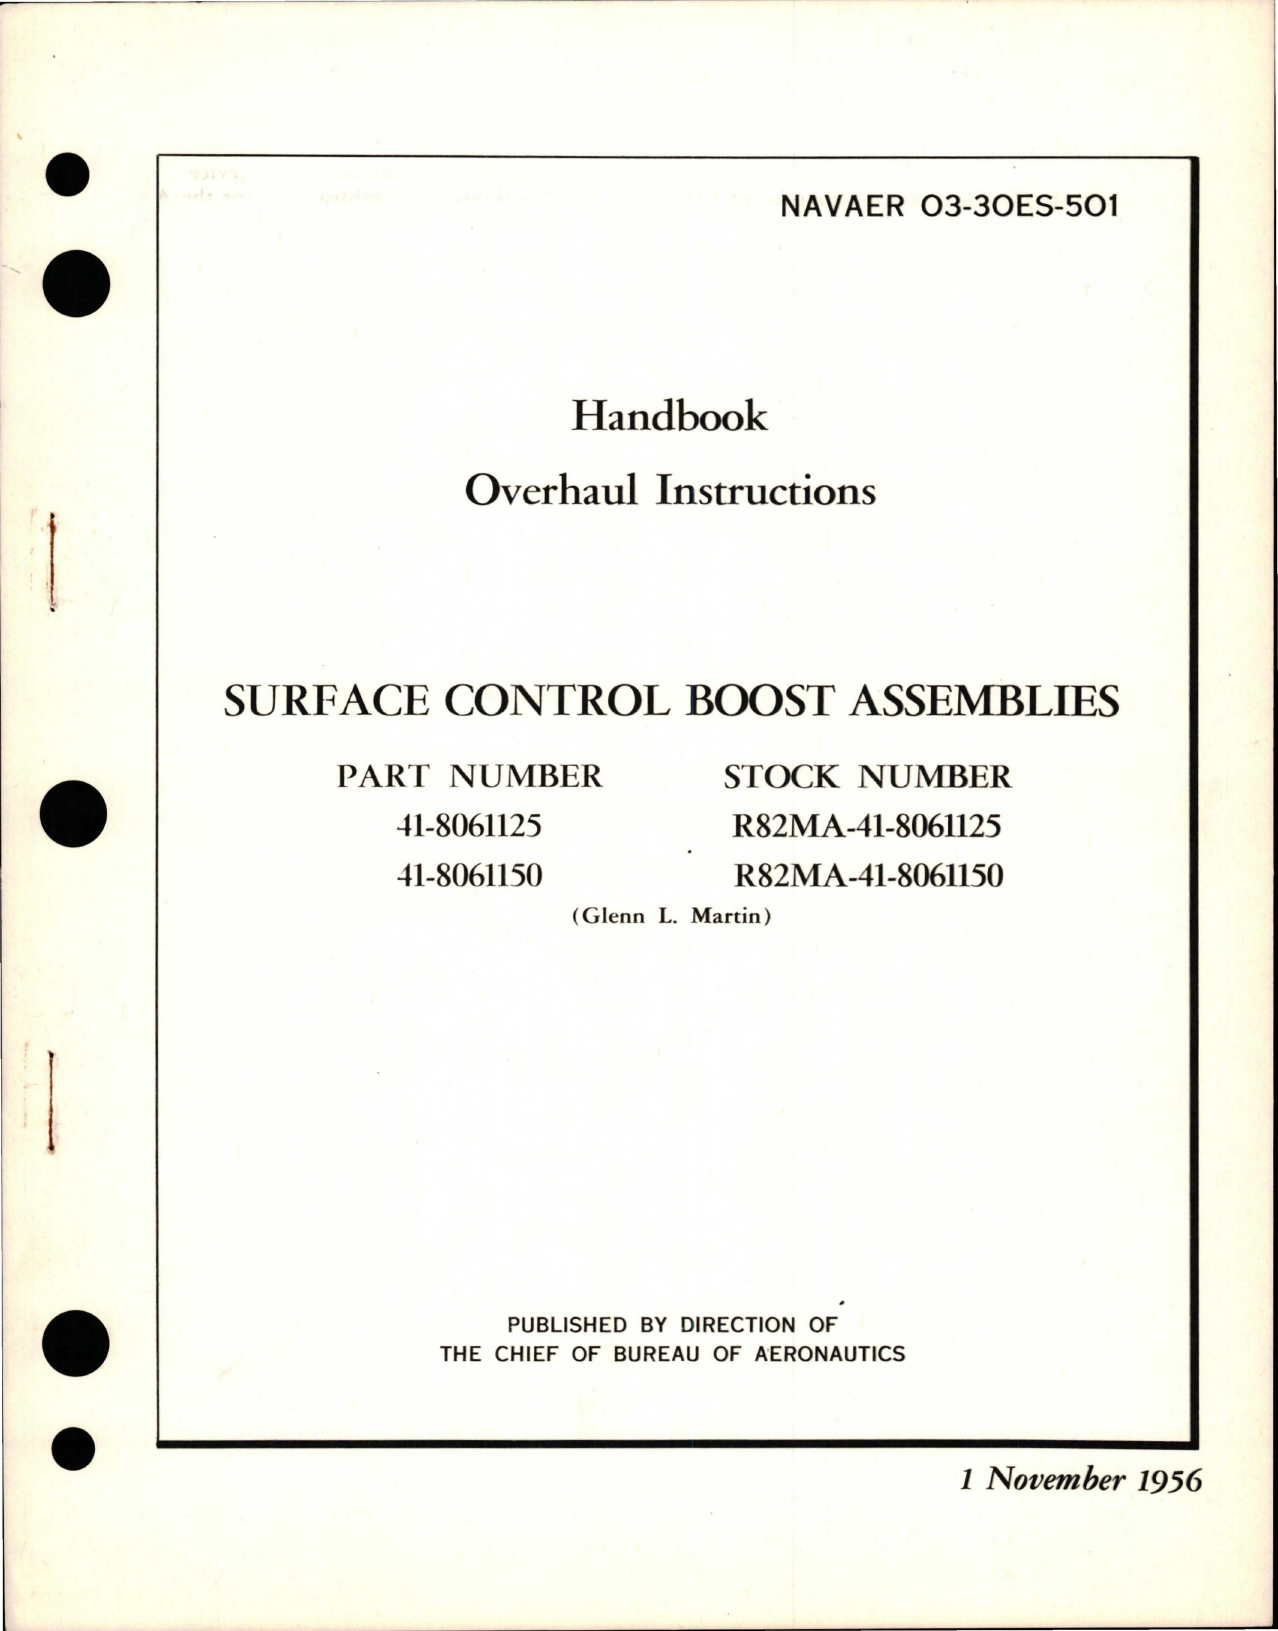 Sample page 1 from AirCorps Library document: Overhaul Instructions for Surface Control Boost Assembly - Parts 41-8061125 and 41-8061150